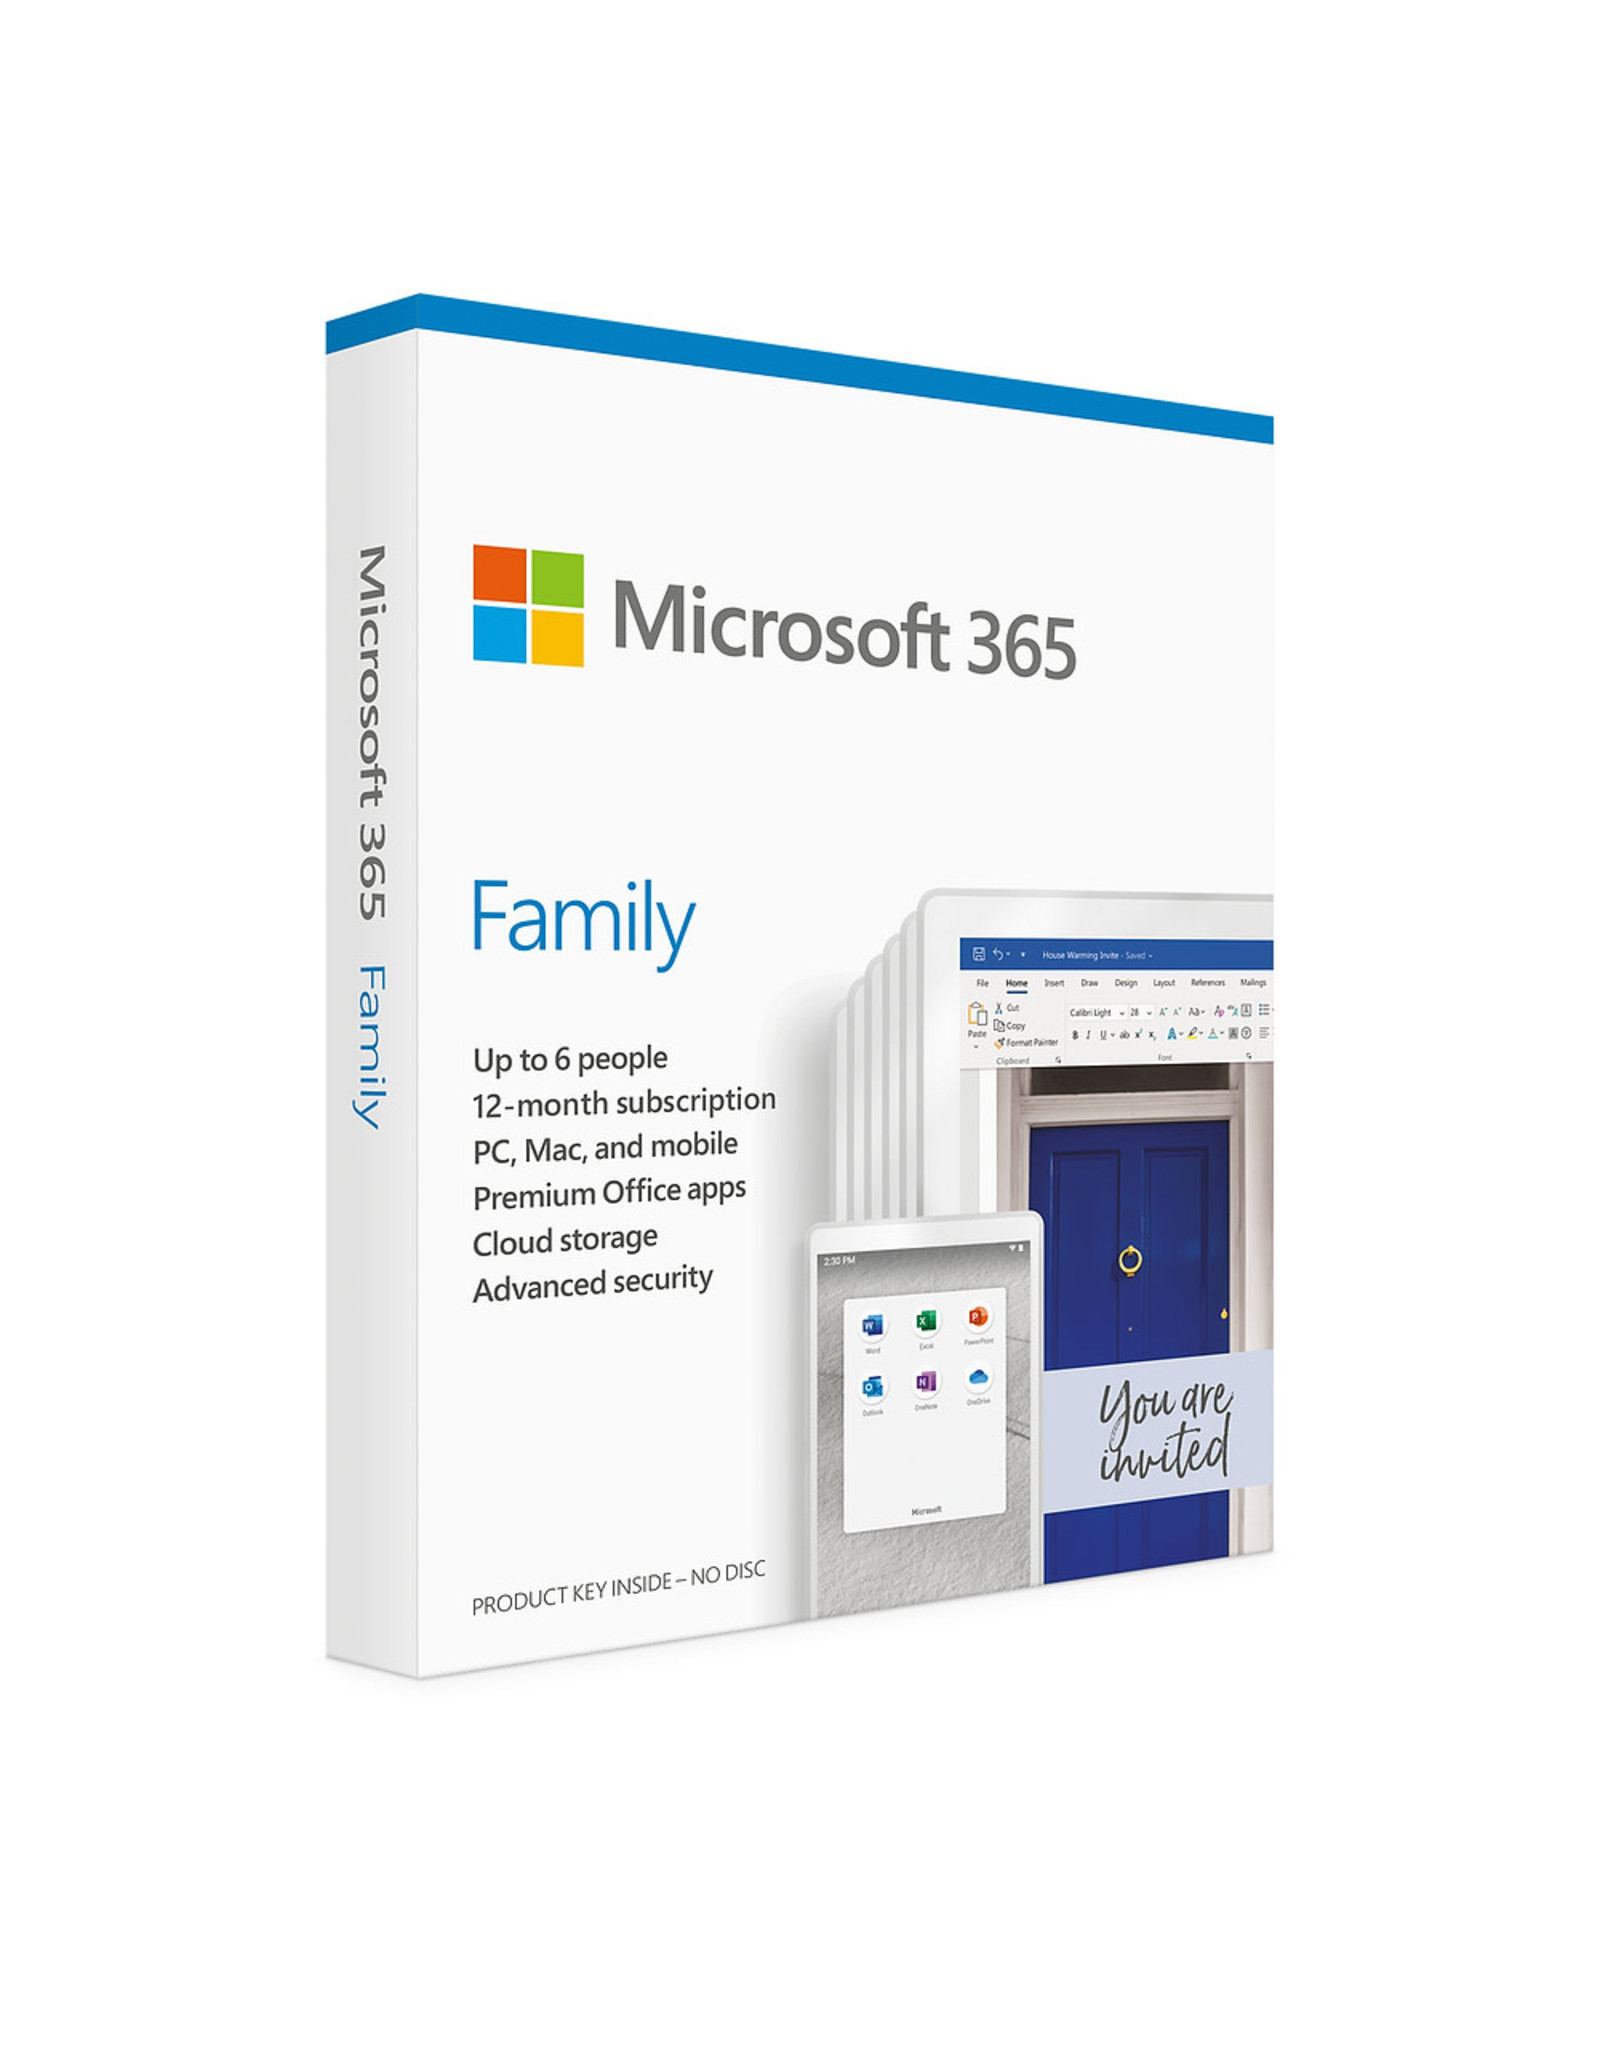 Microsoft Microsoft 365 Family - Word, Excel, Powerpoint, Notes, Outlook - 6 people - up to 6TB One Drive cloud storage